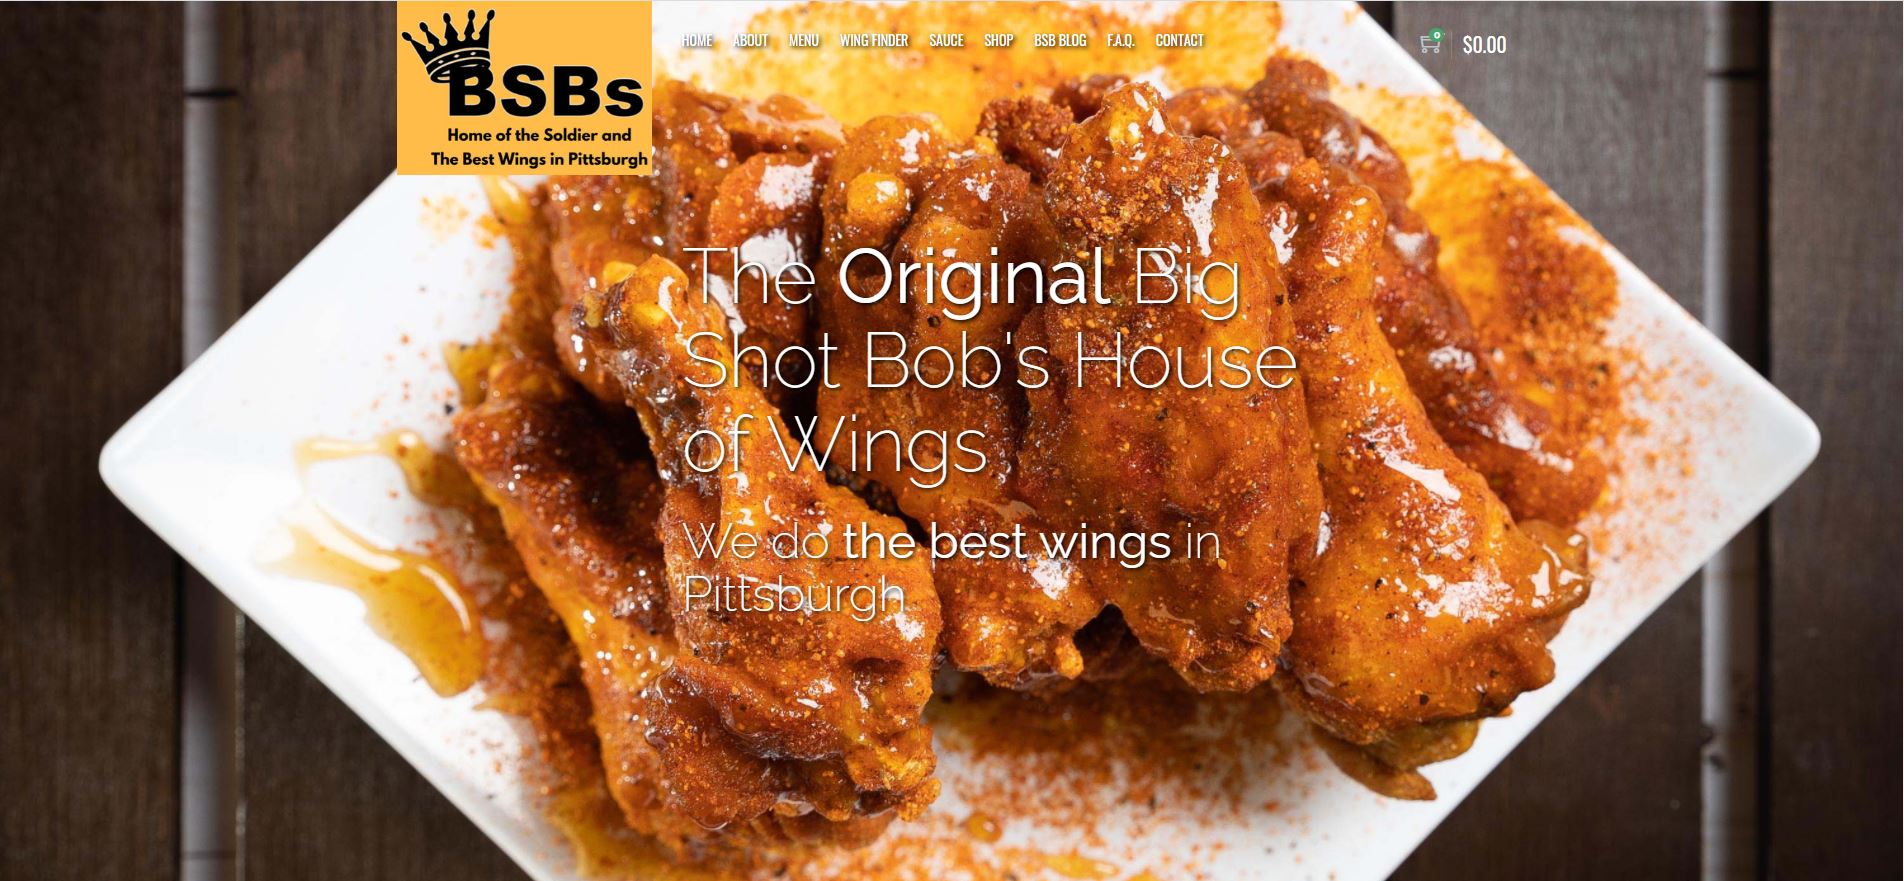 Big Shot Bobs House of Wings  Home of the Soldier and the Best Wings in  the U.S.A.